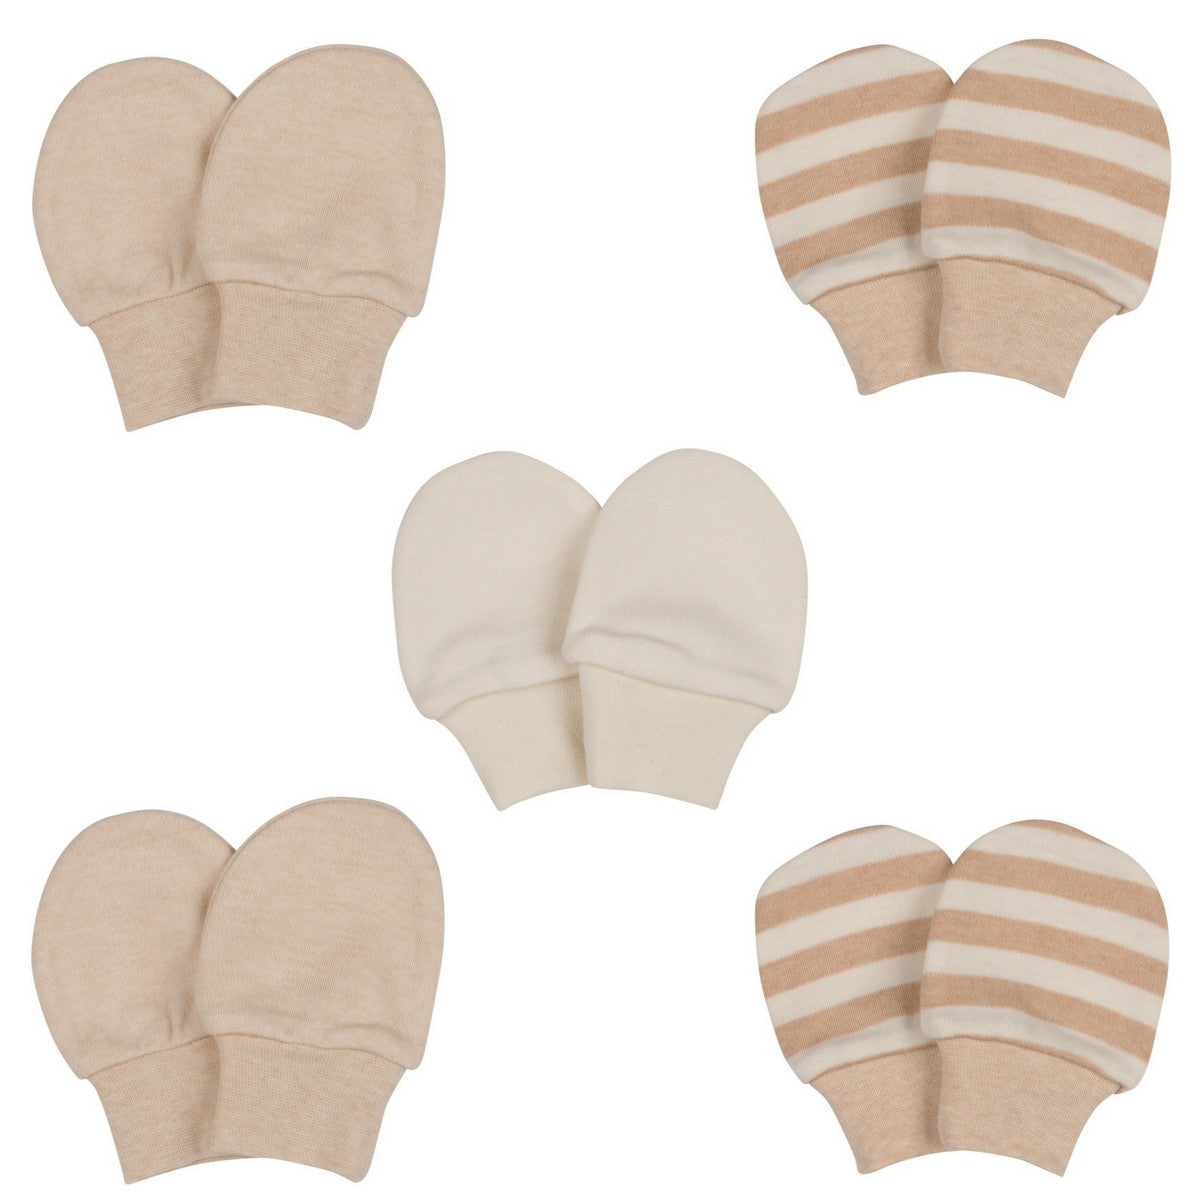 Organic Cotton Baby Mittens, 5-Pairs - Niteo Collection